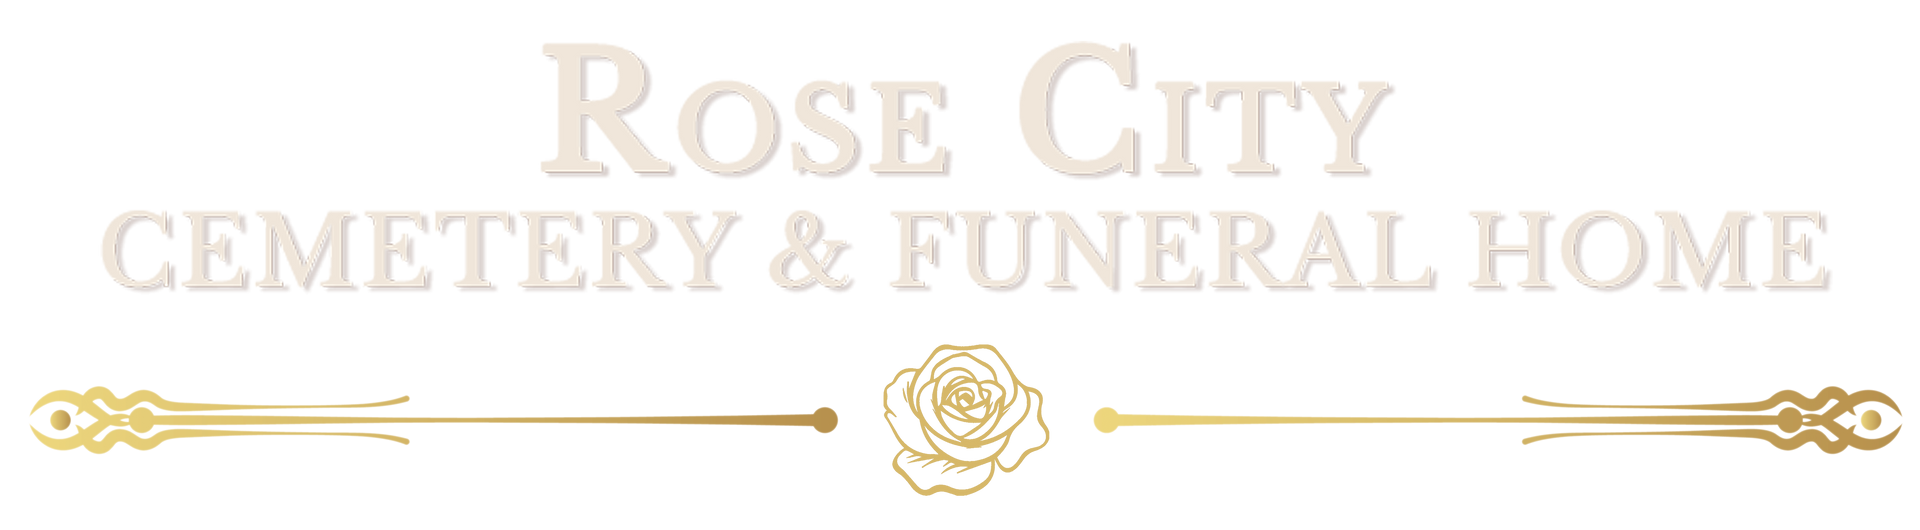 Rose City Cemetery and Funeral Home Logo